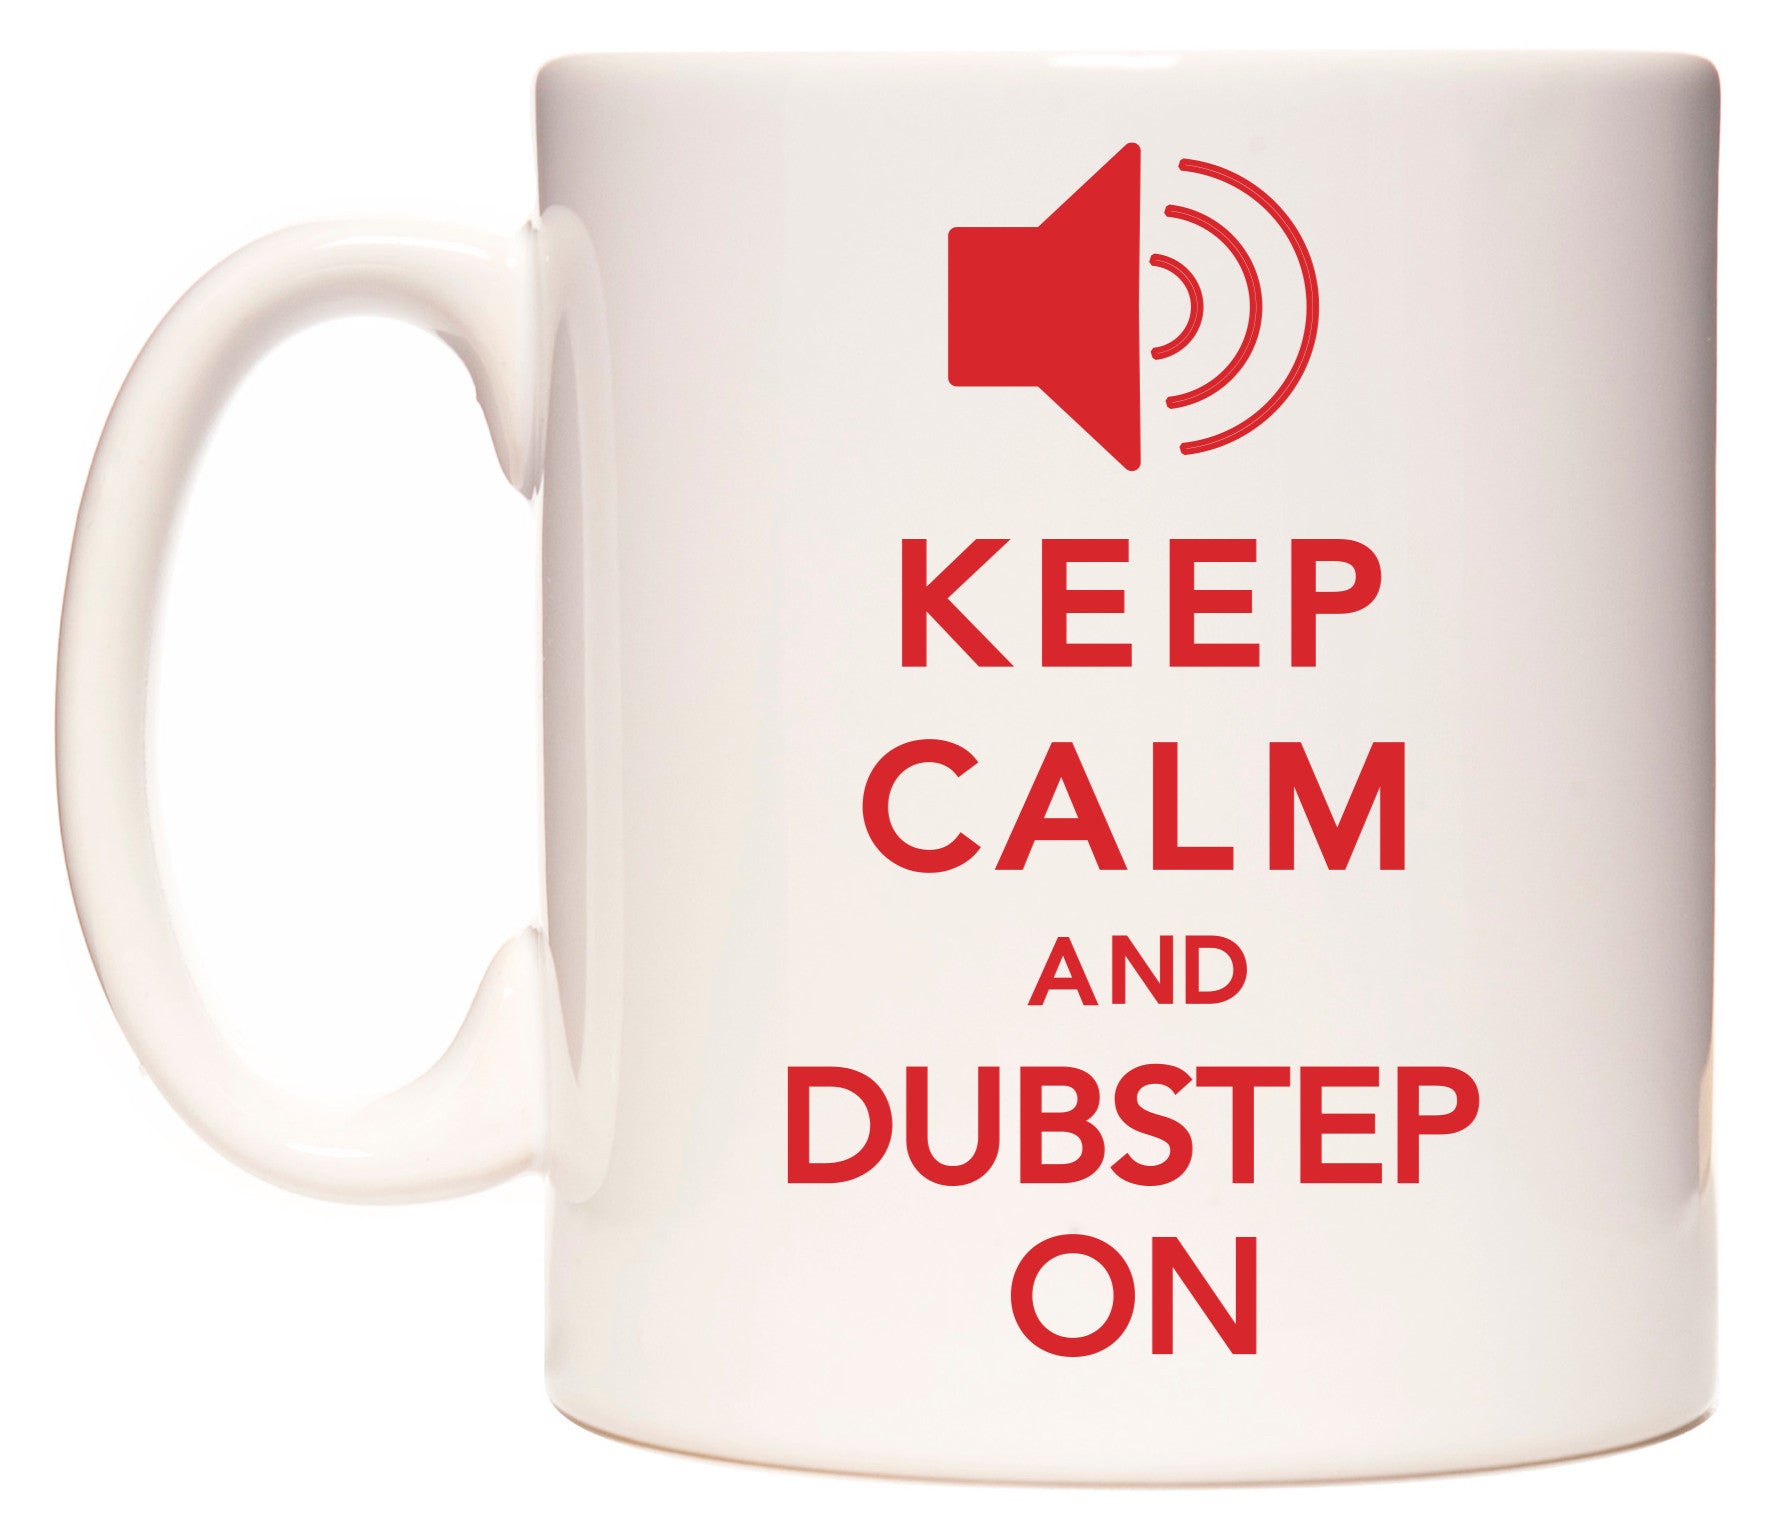 This mug features KEEP CALM AND DUBSTEP ON